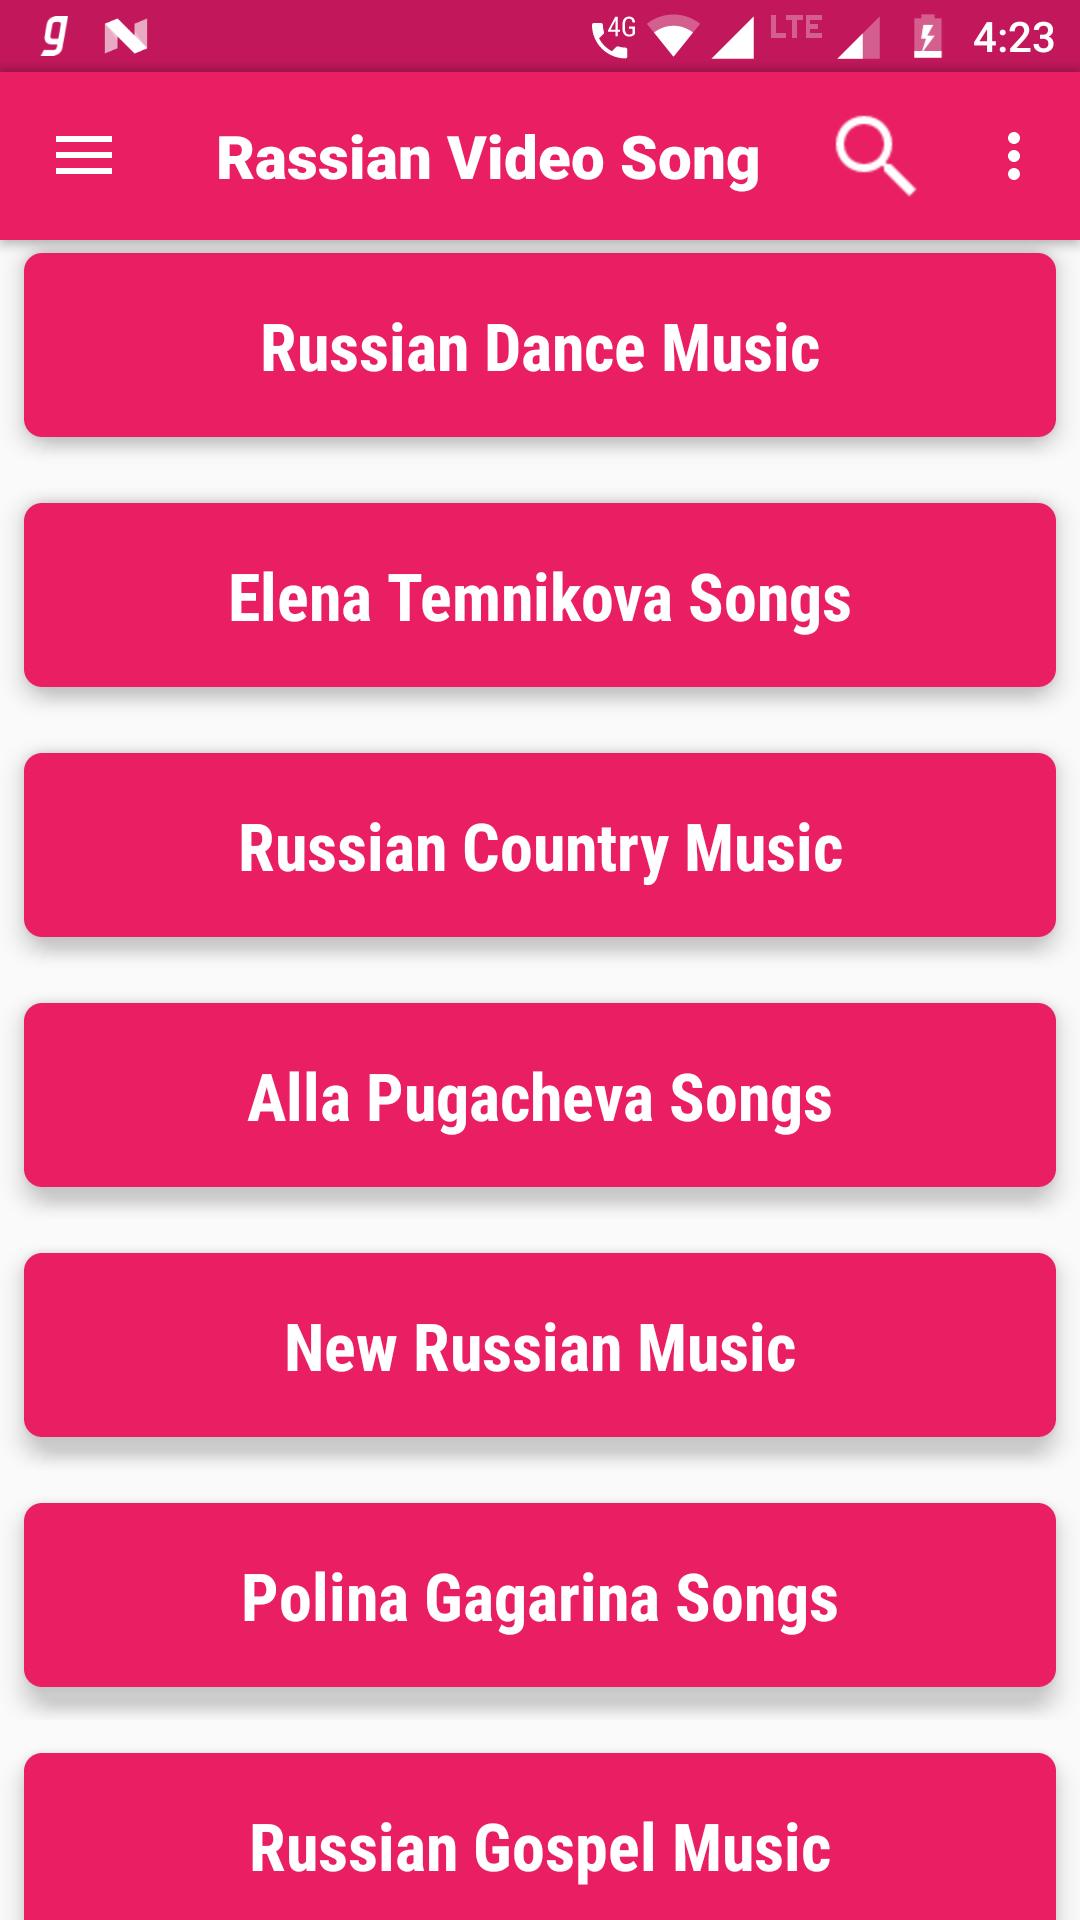 Russian Music Radio : Russian Songs Video 2017 for Android - APK Download